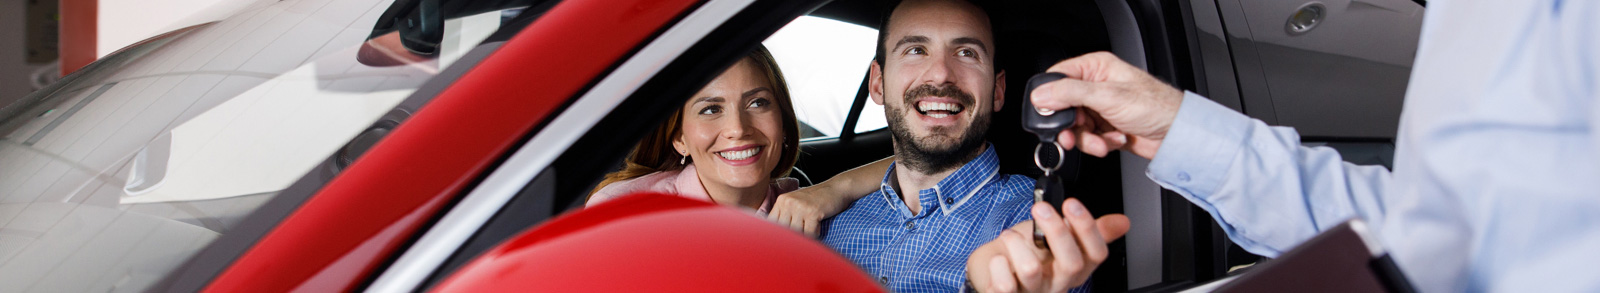 Couple in red car accepting car keys from salesman